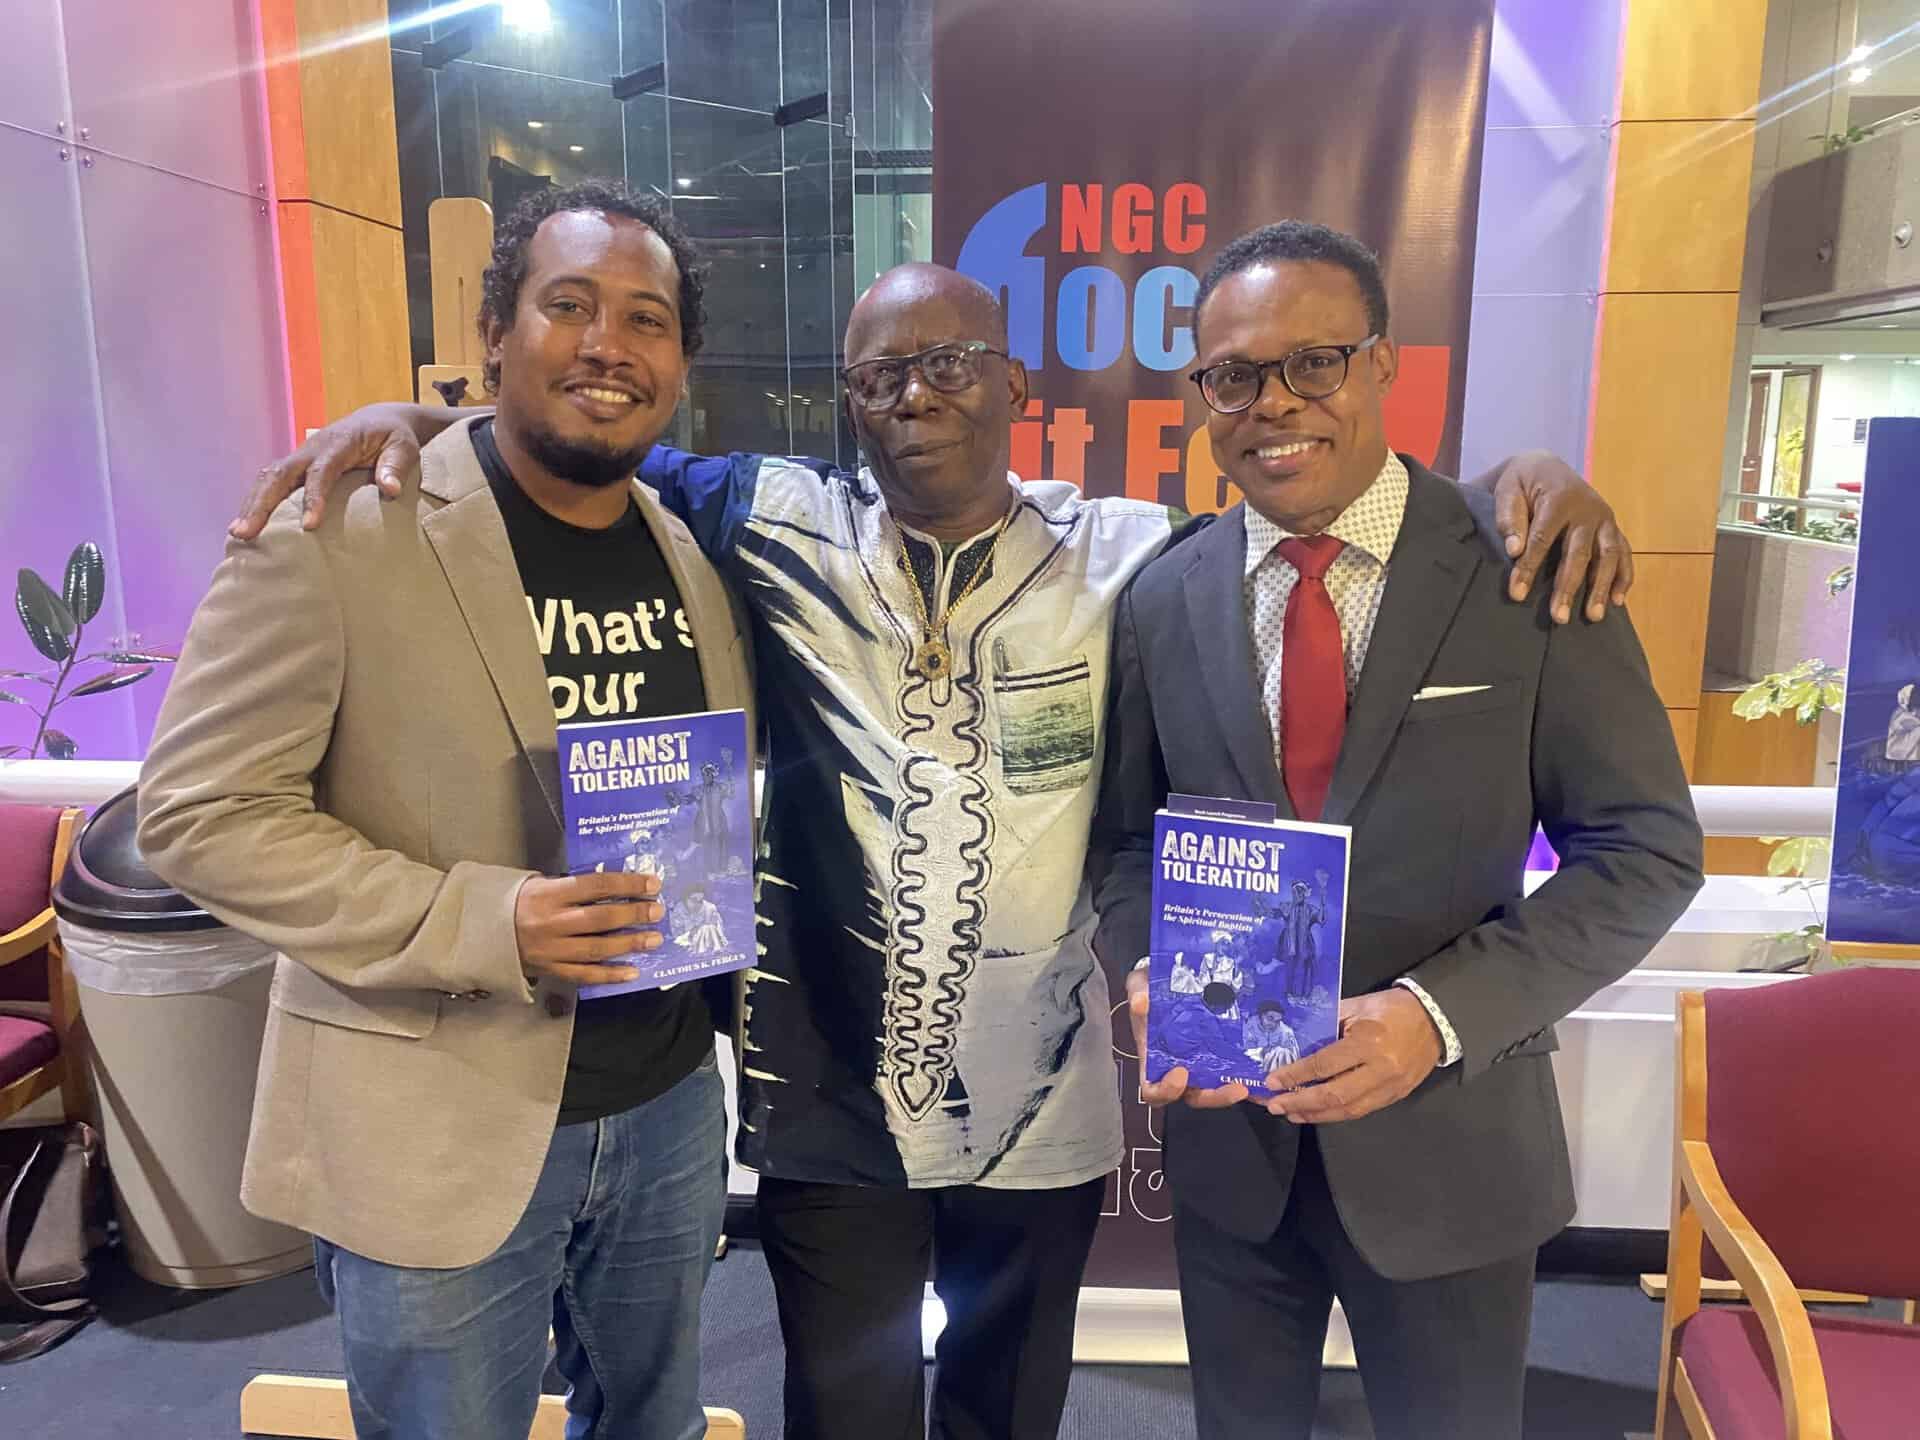 (L to R) Jean-Claude Cournand, CEO Bocas Lit Fest, Dr Claudius Fergus, author of Against Toleration, Minister of Foreign and CARICOM Affairs, Dr Amery Browne take a candid picture at the book launch event